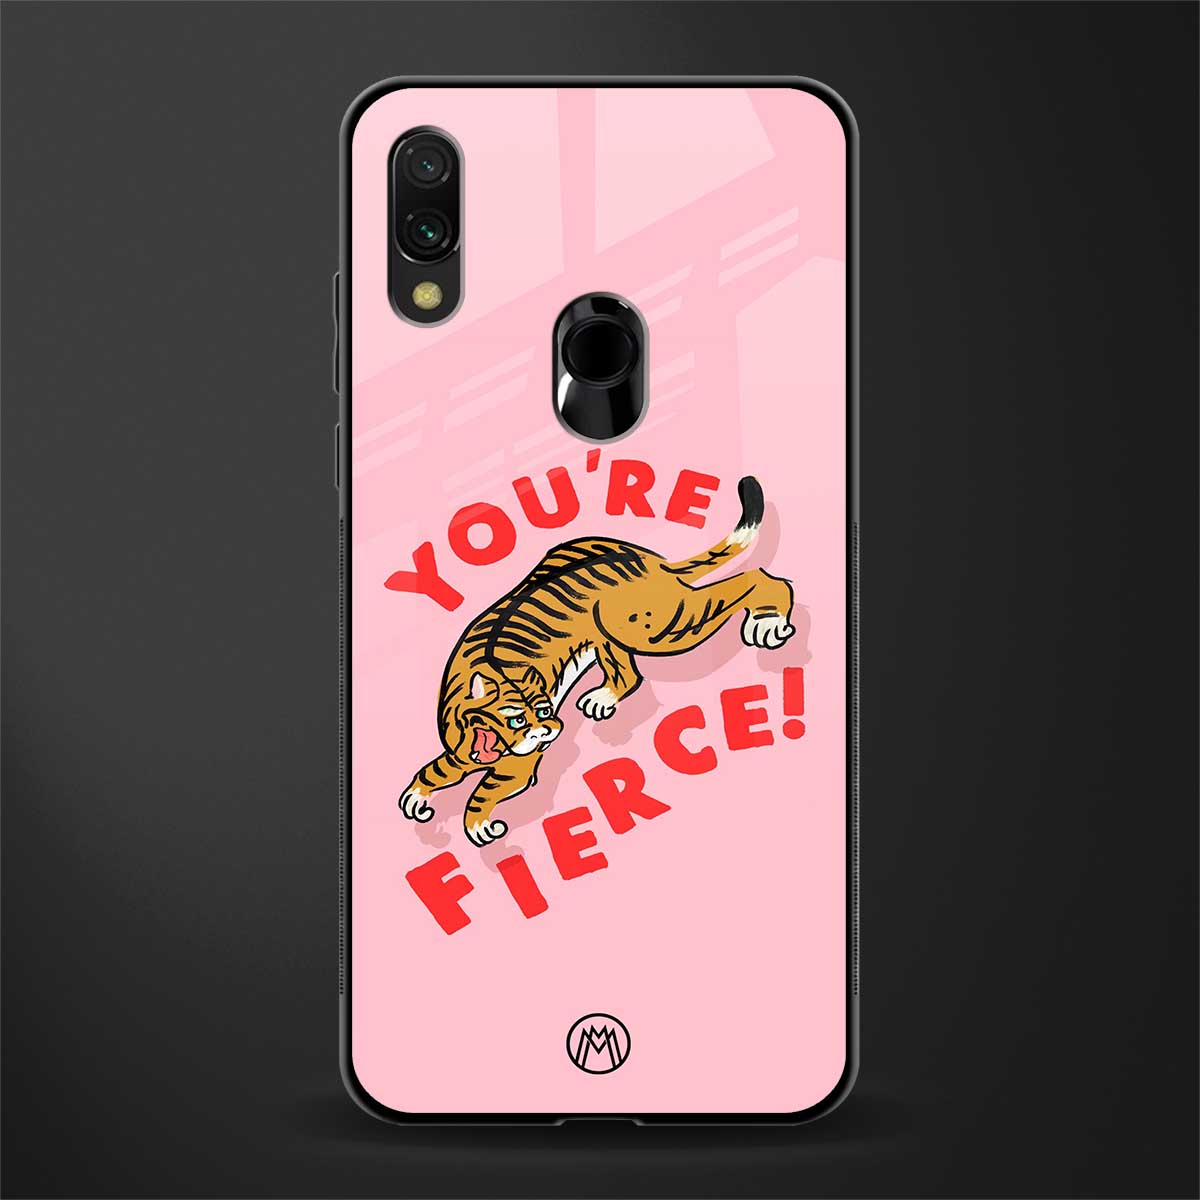 you're fierce glass case for redmi note 7 pro image